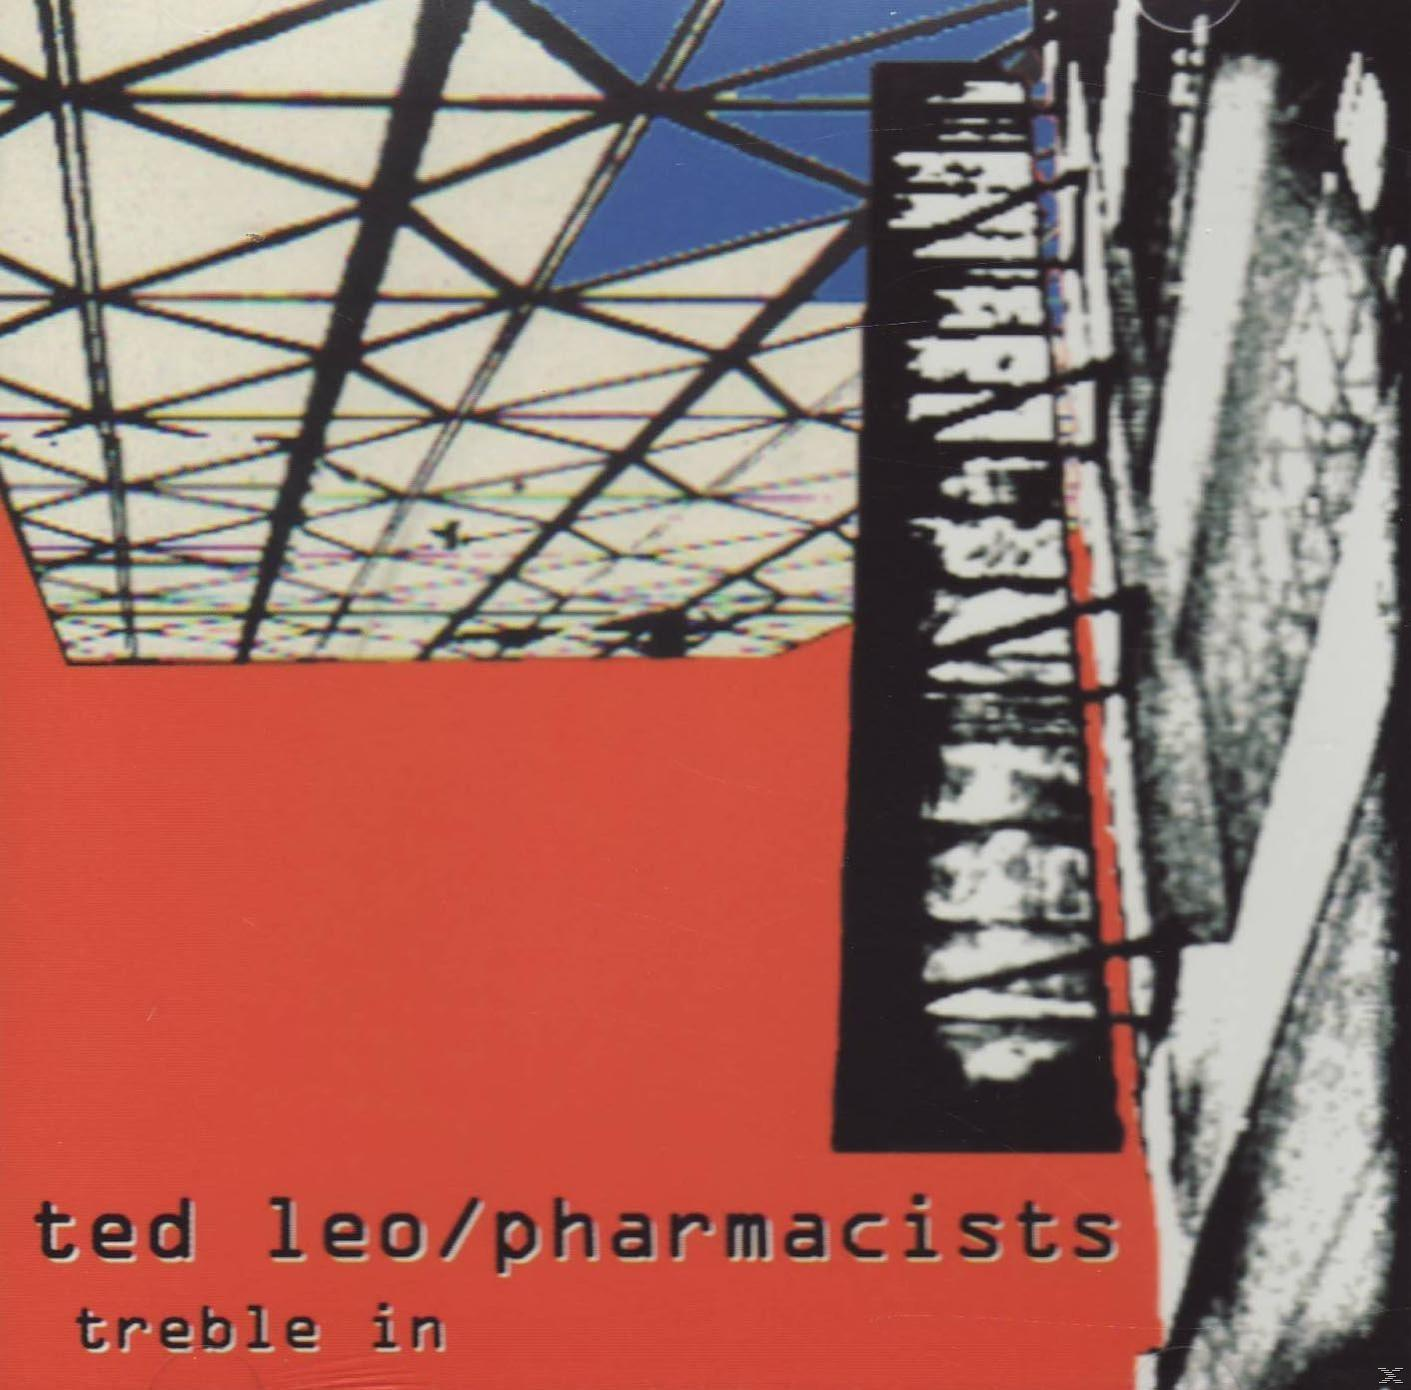 3 Pharmacists - (2-Track)) The Ted Ep Zoll Single (CD Treble In Leo, - Trouble